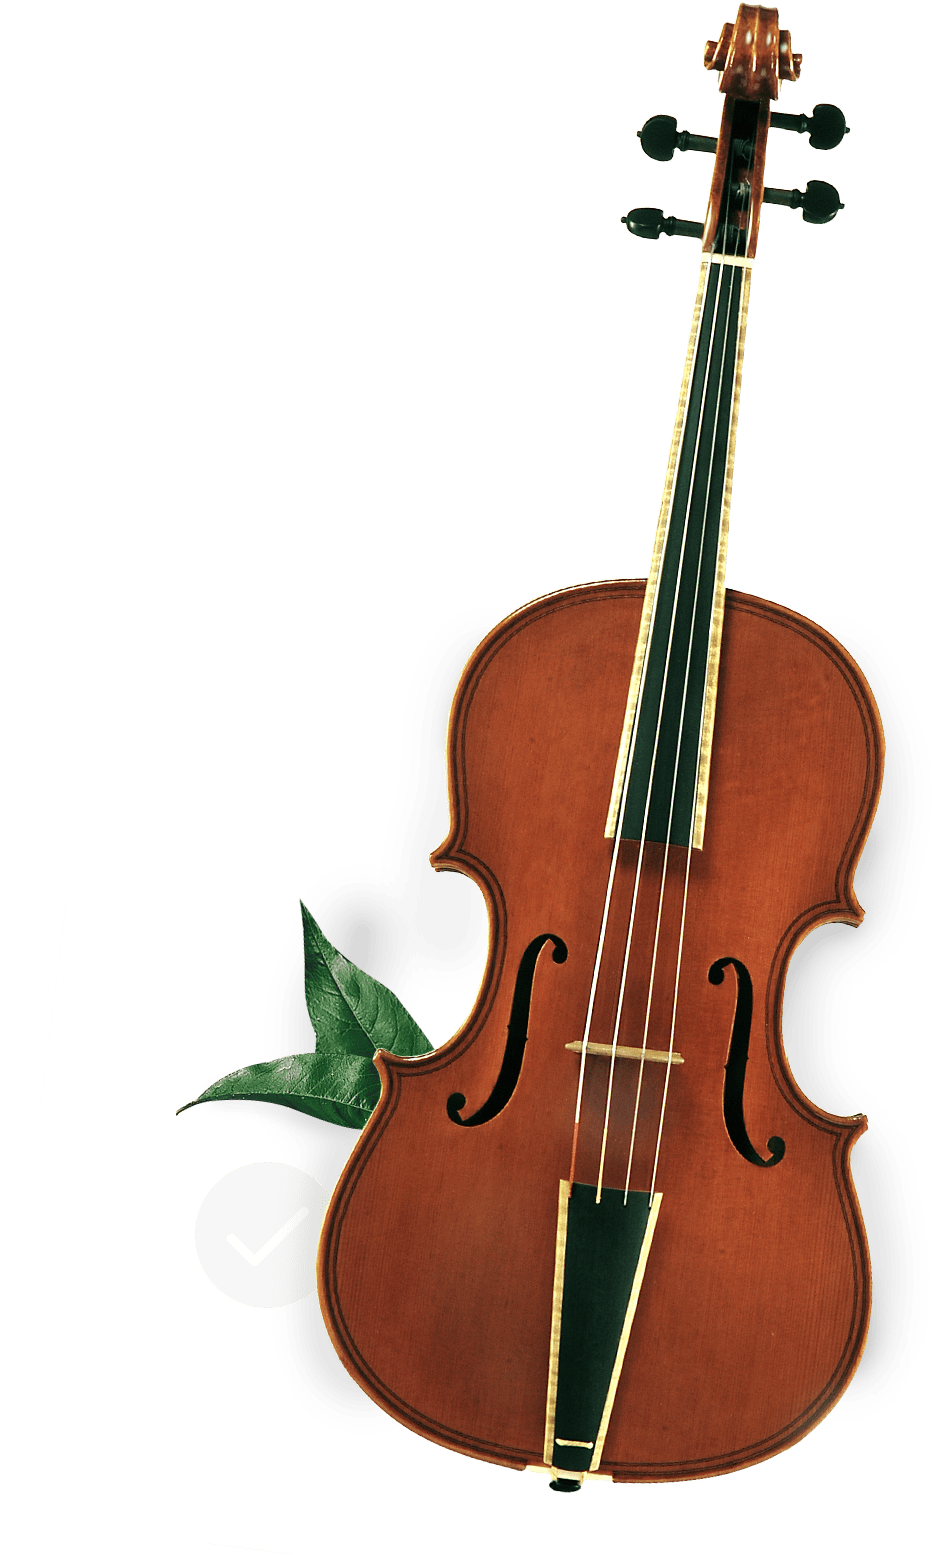 Classic Violinwith Green Leaves PNG image